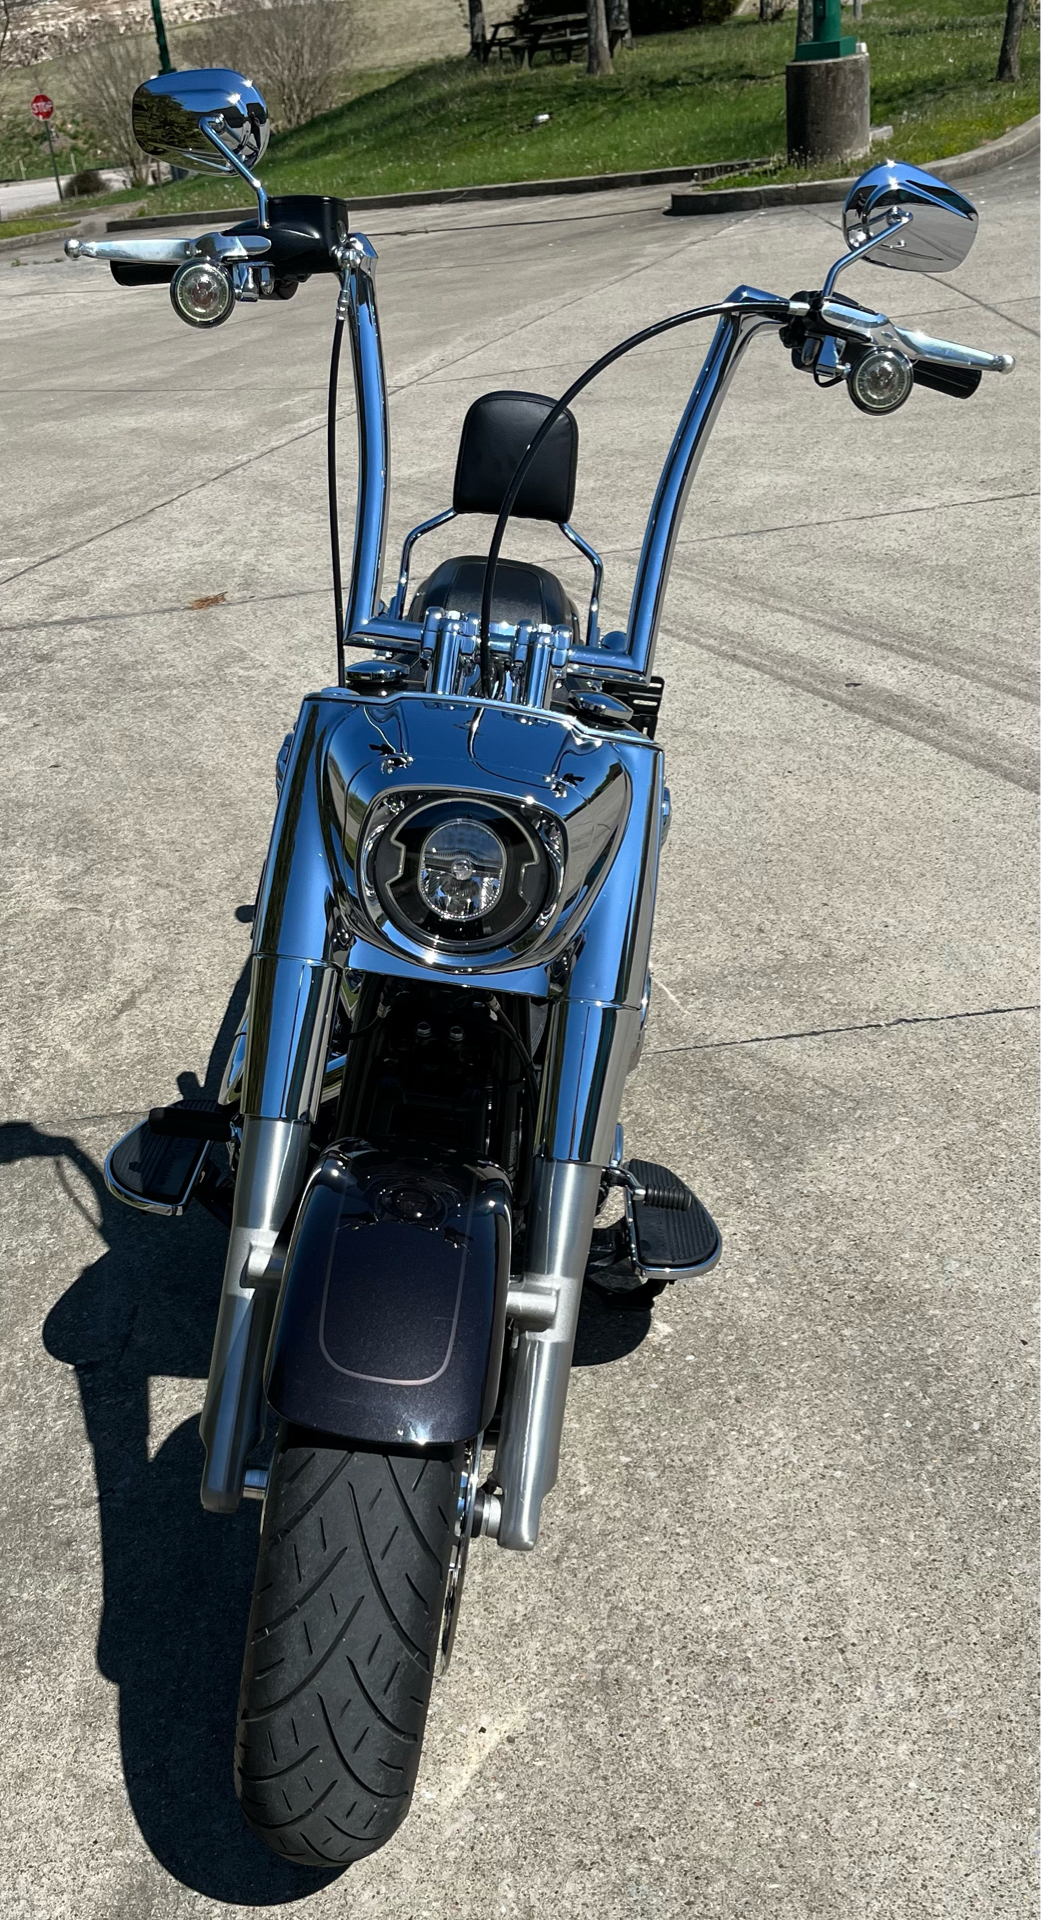 2021 Harley-Davidson Fat Boy 114 in Columbia, Tennessee - Photo 13